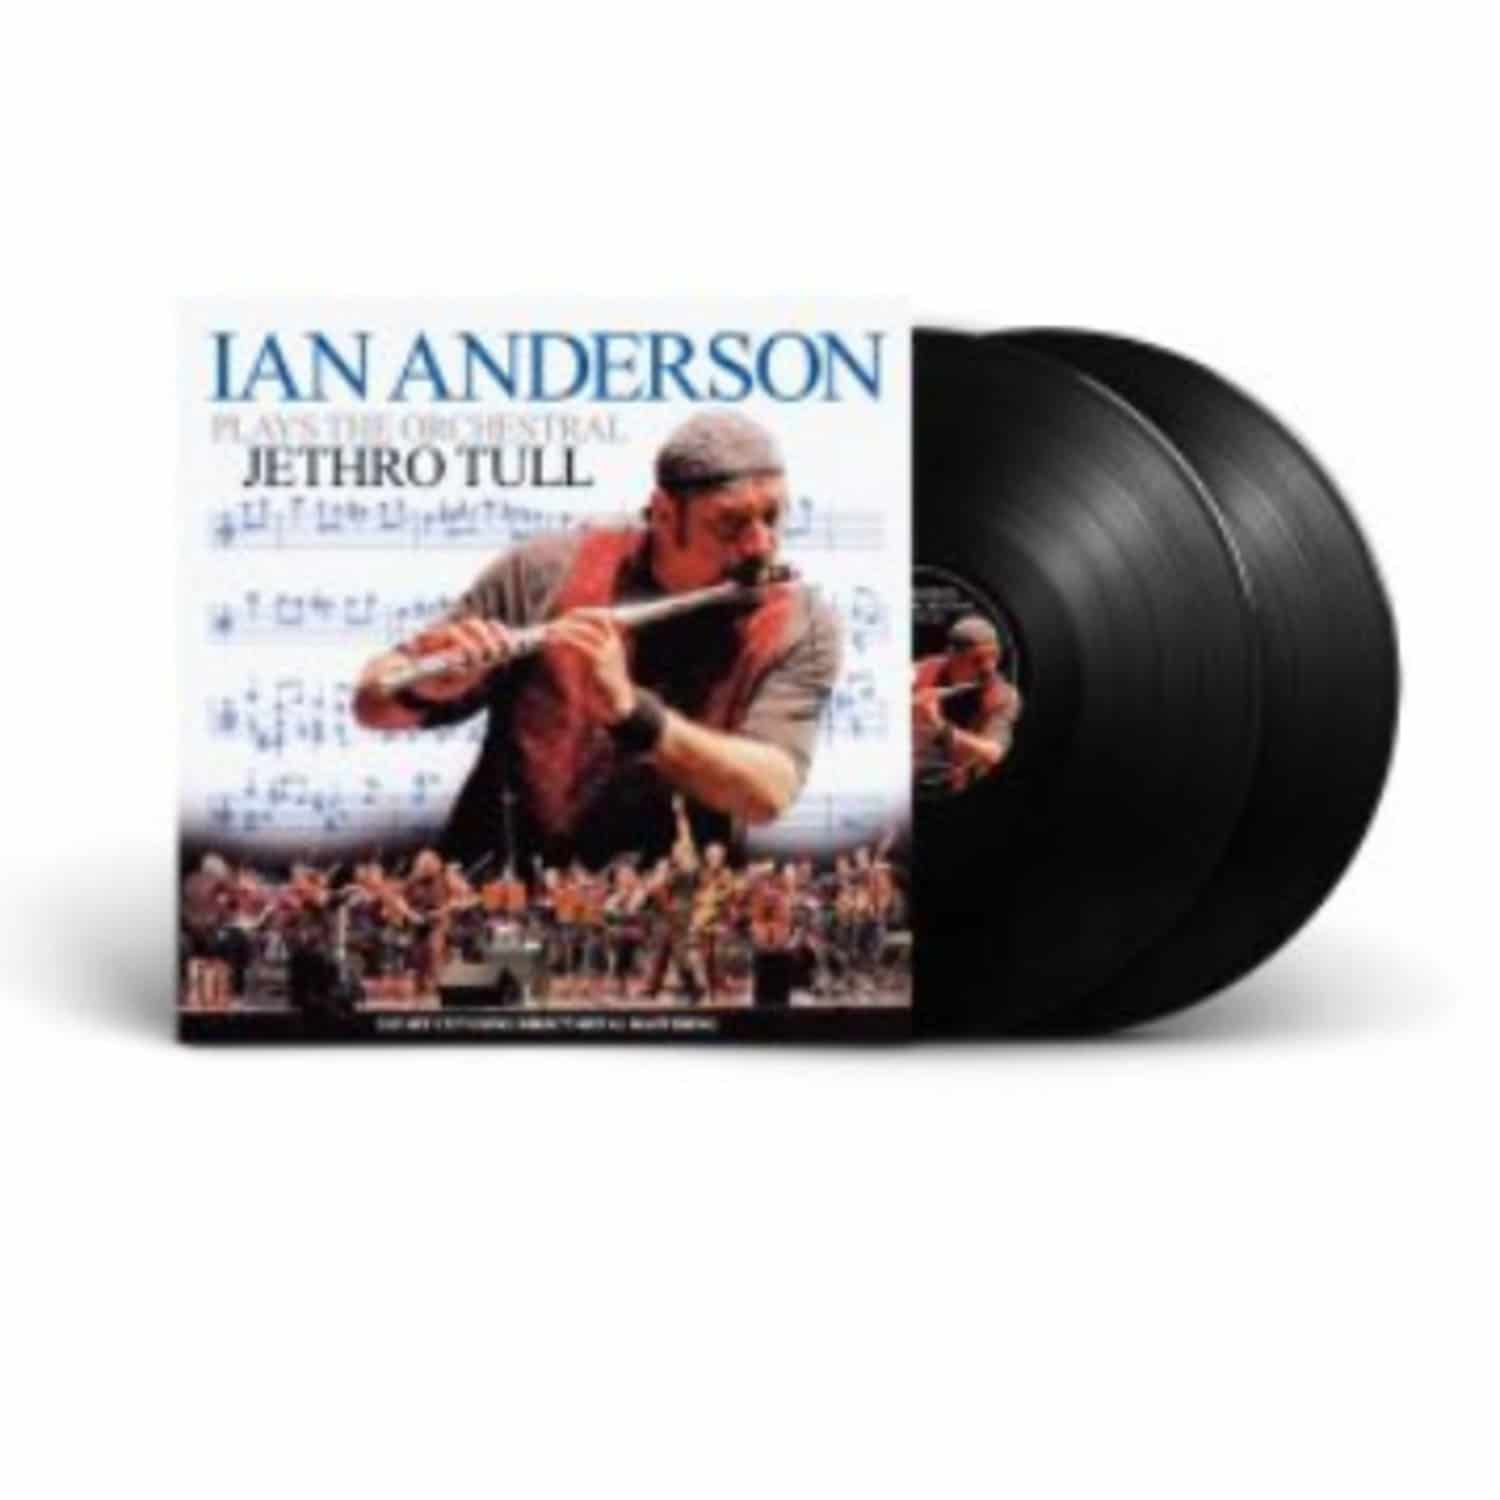 Ian Anderson - PLAYS THE ORCHESTRAL JETHRO TULL 